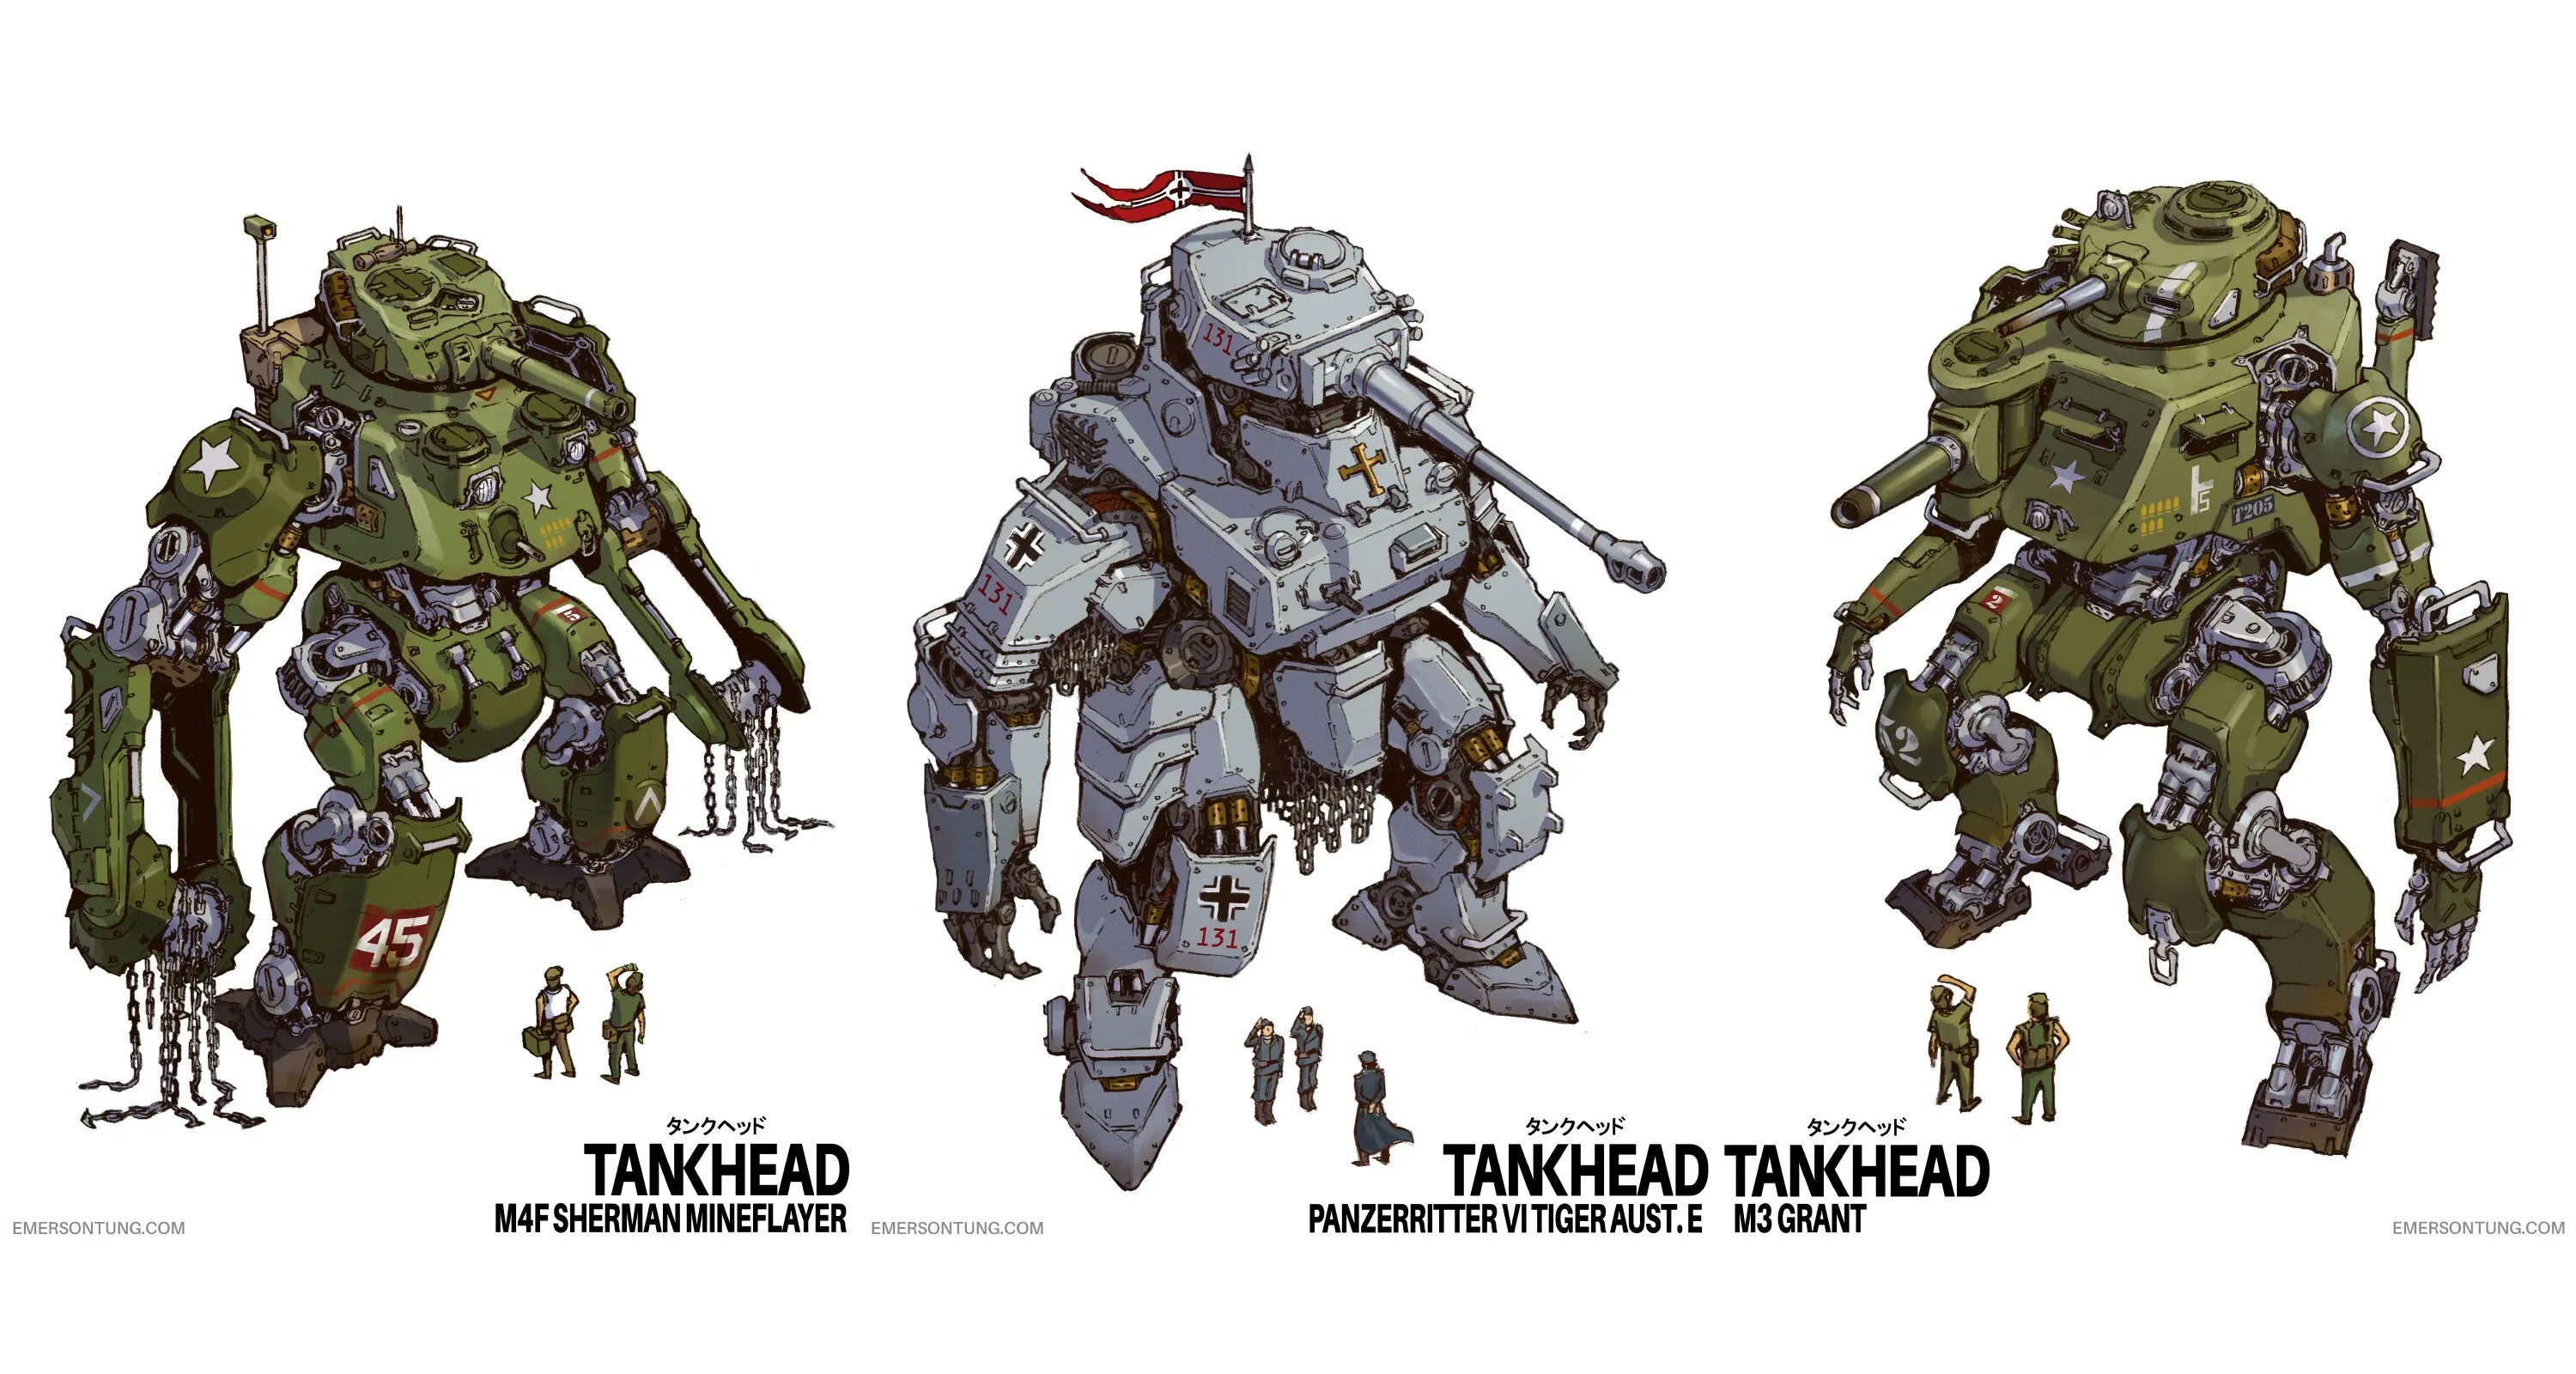 What If World War Two Tanks, But Also Mechs